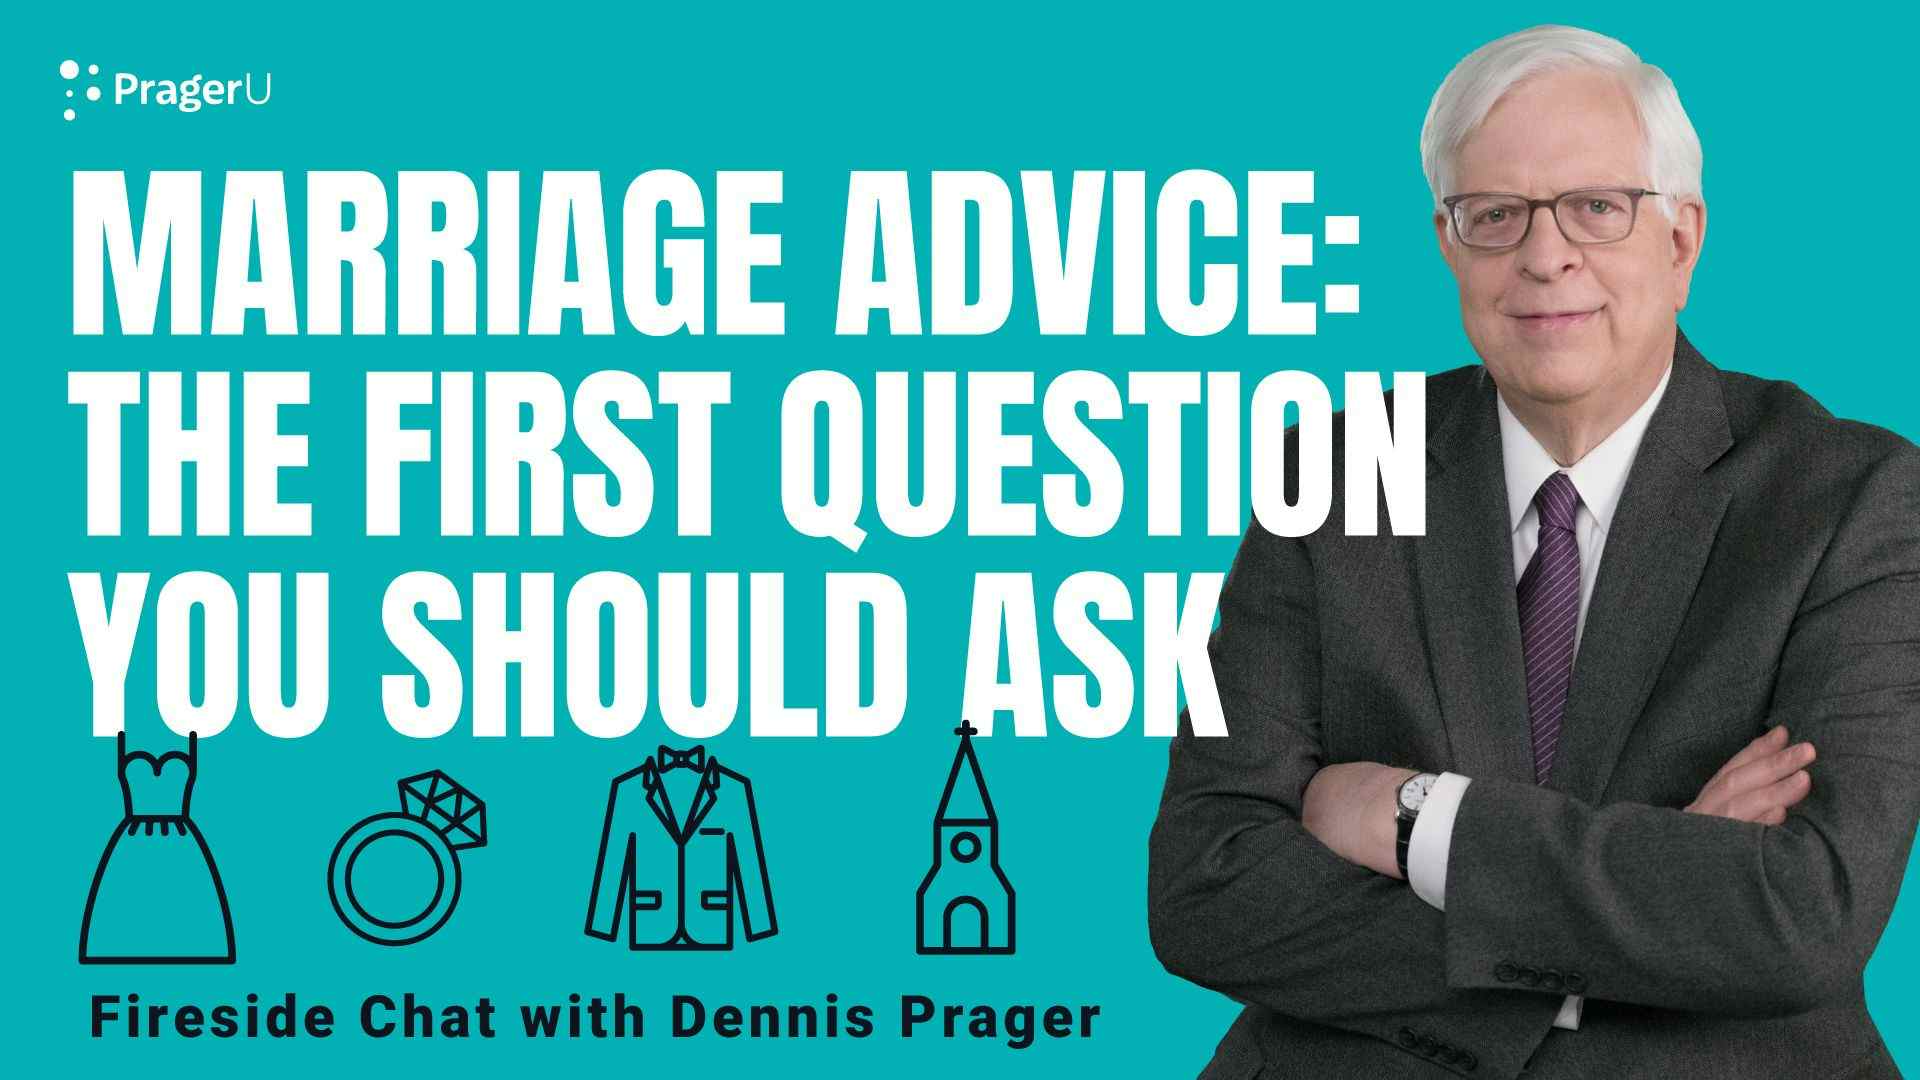 Marriage Advice: The First Question You Should Ask